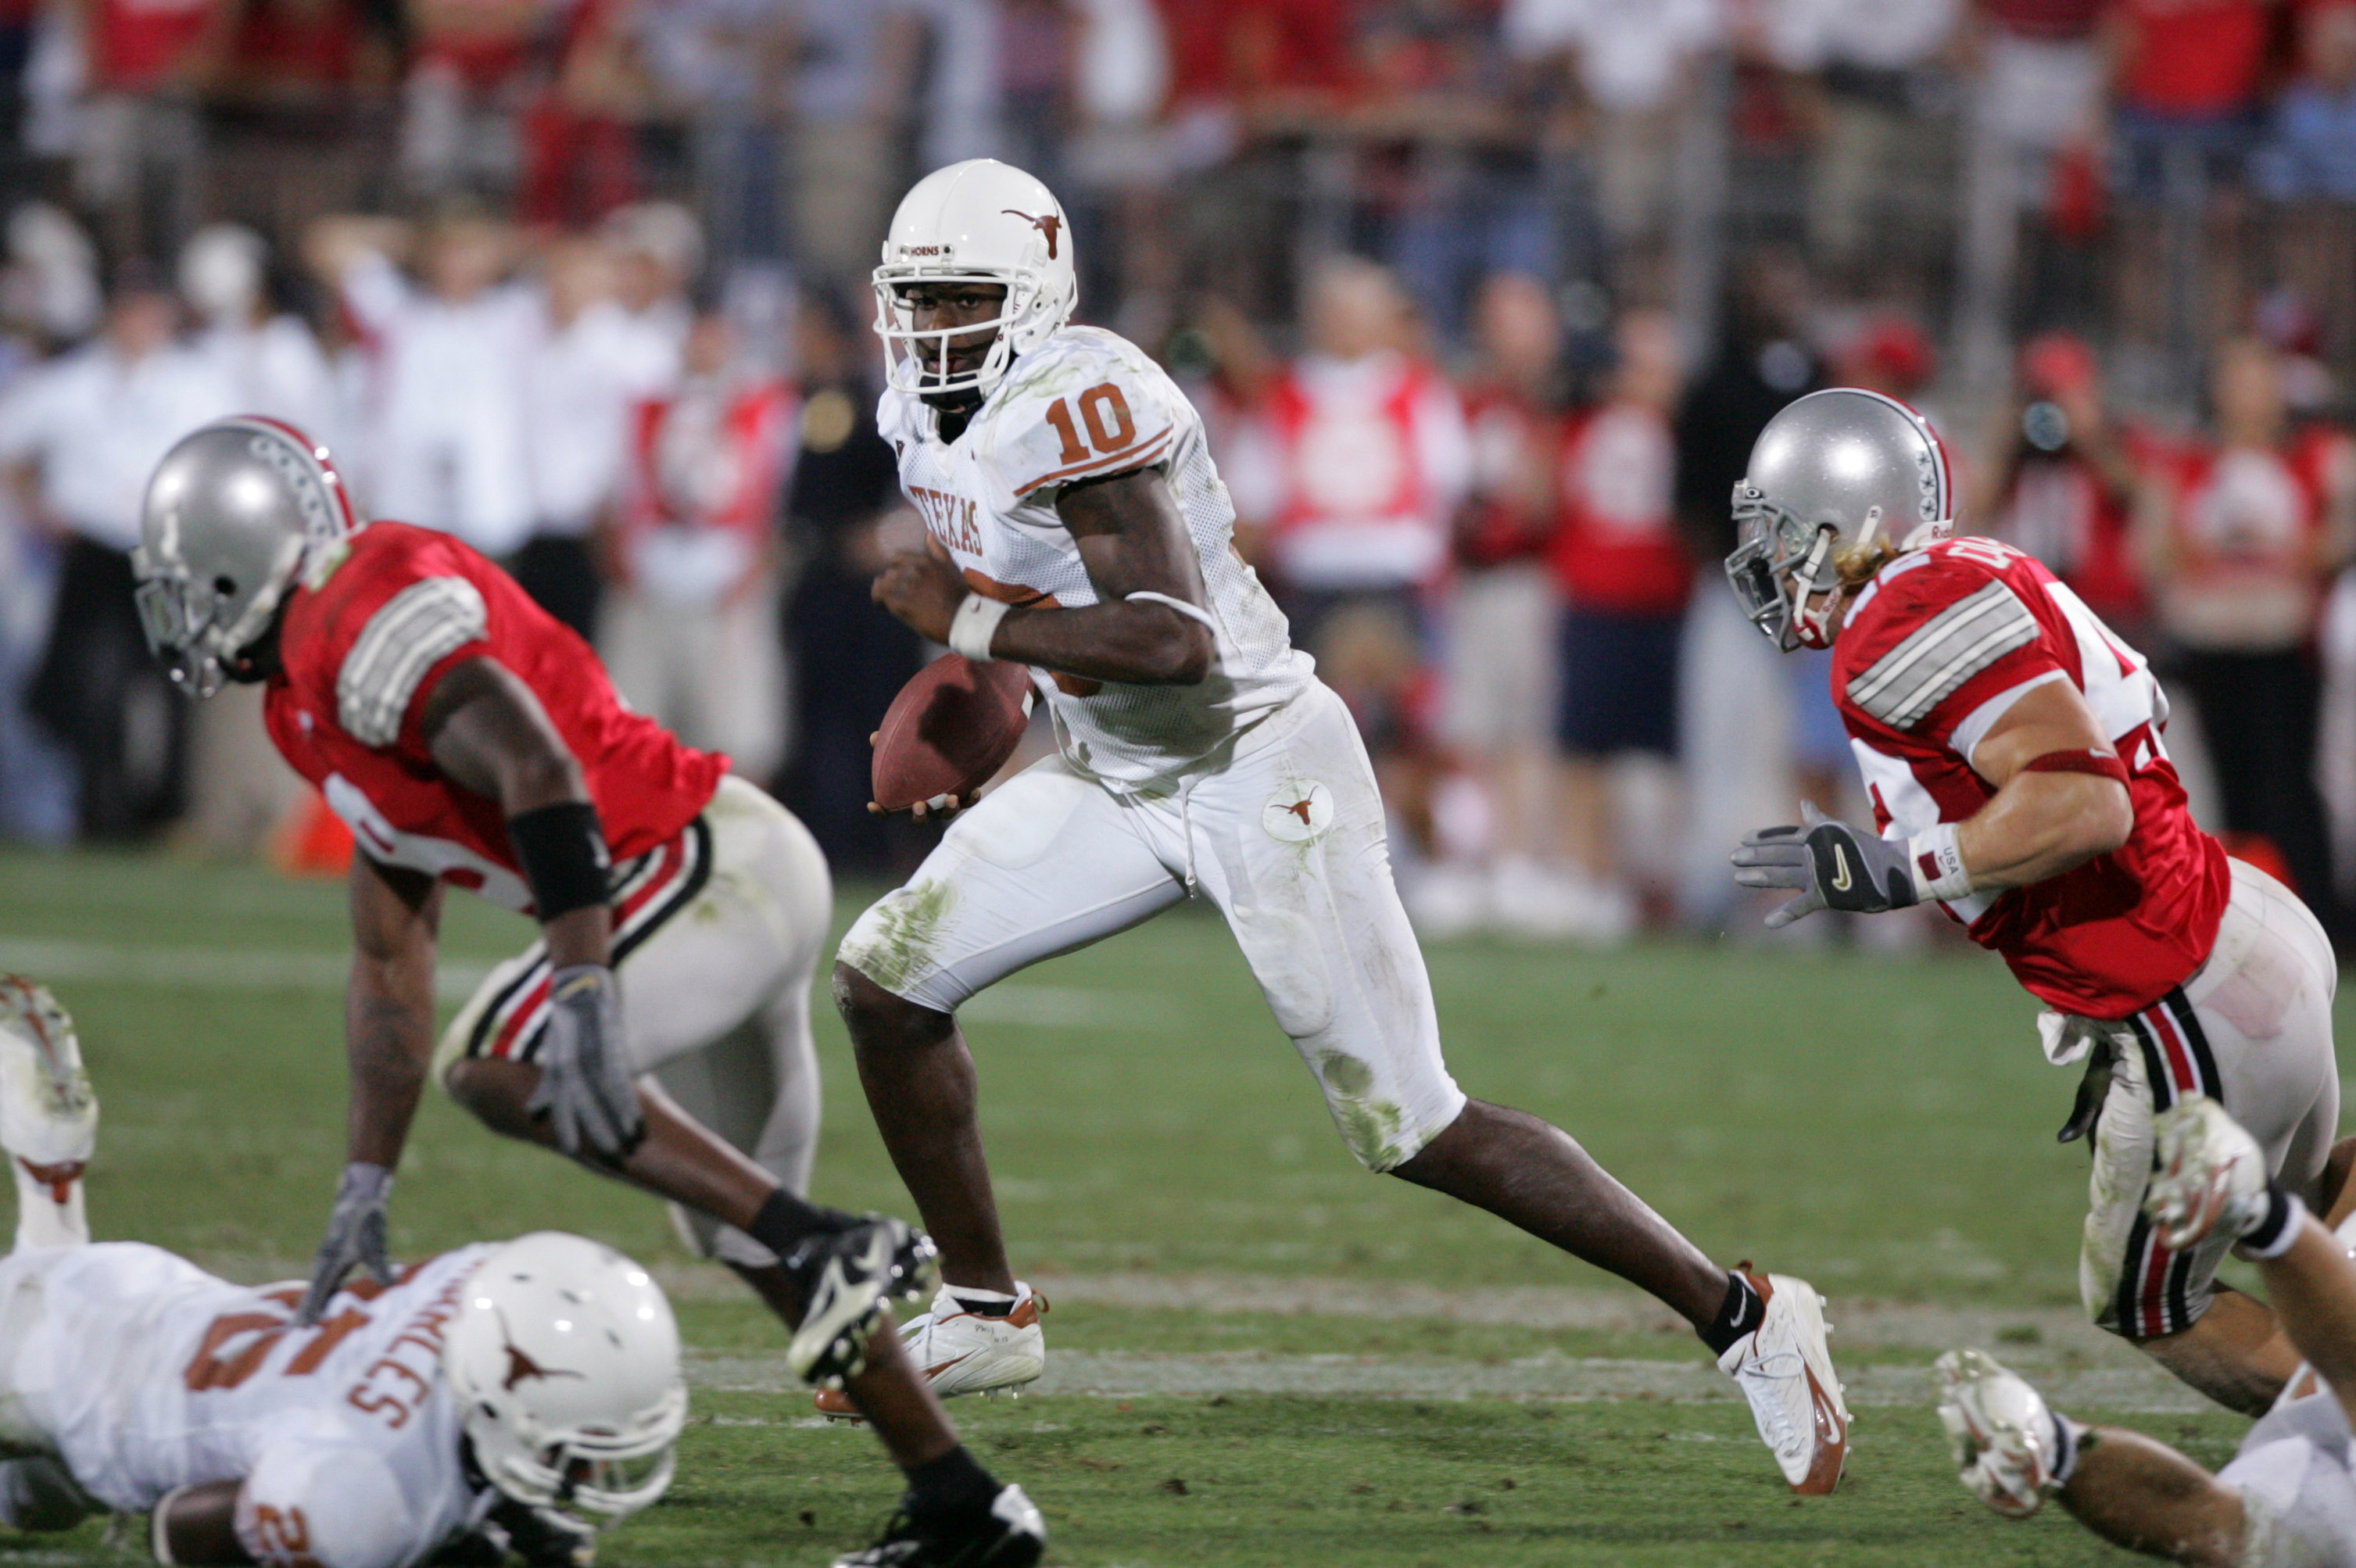 Texas Football Top games to relive during social distancing